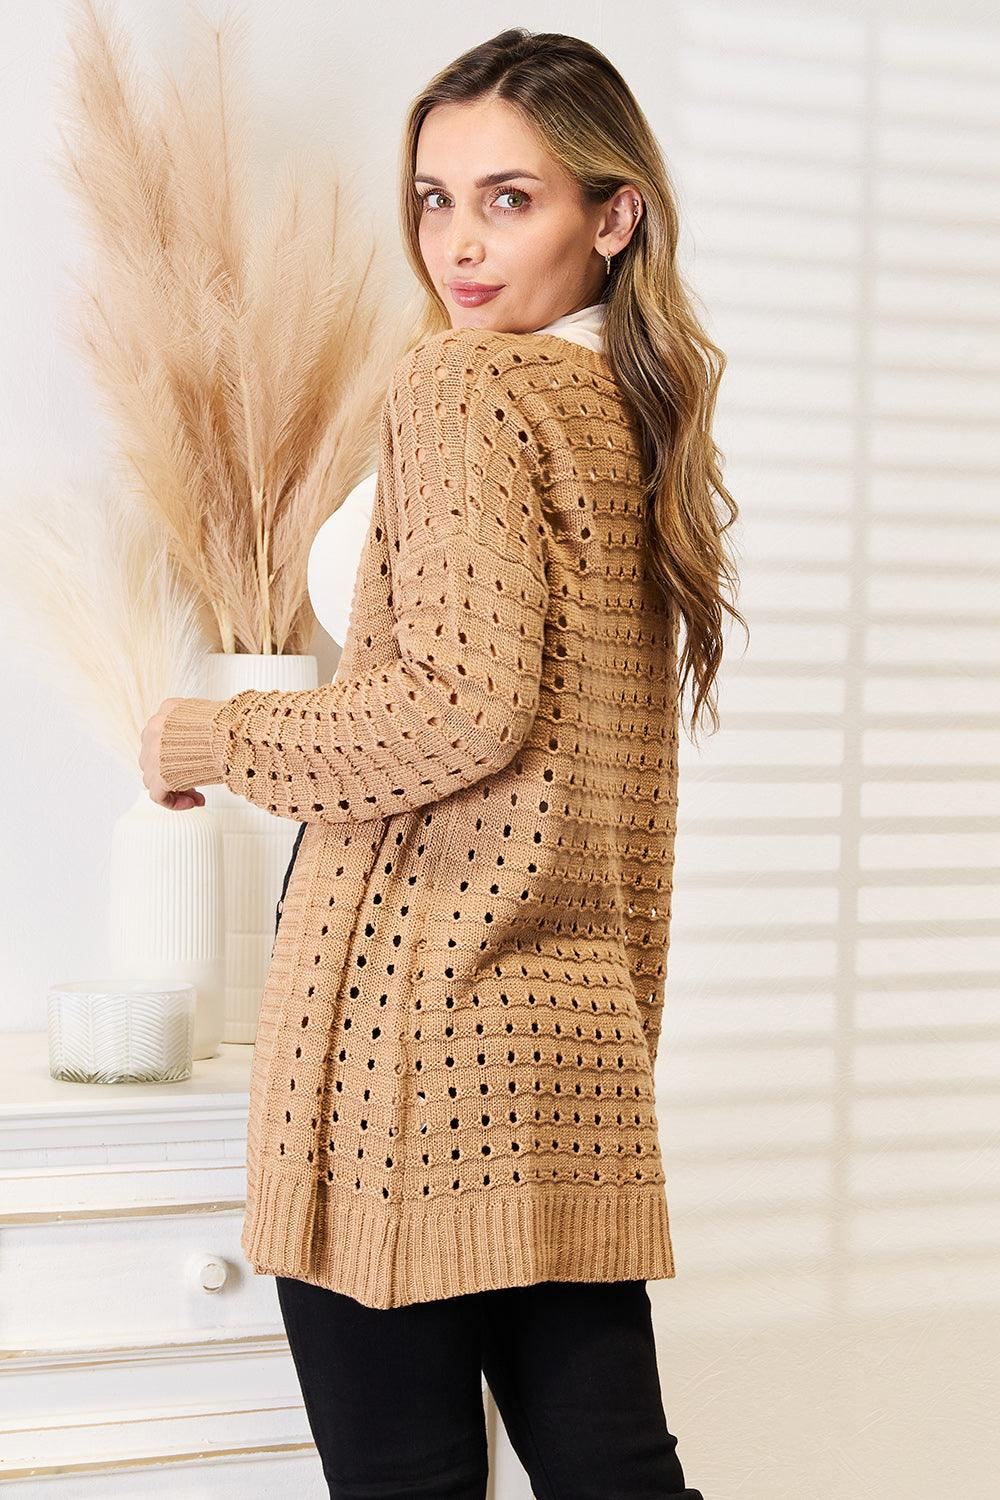 Brown Knit Cardigan - Inspired Eye Boutique